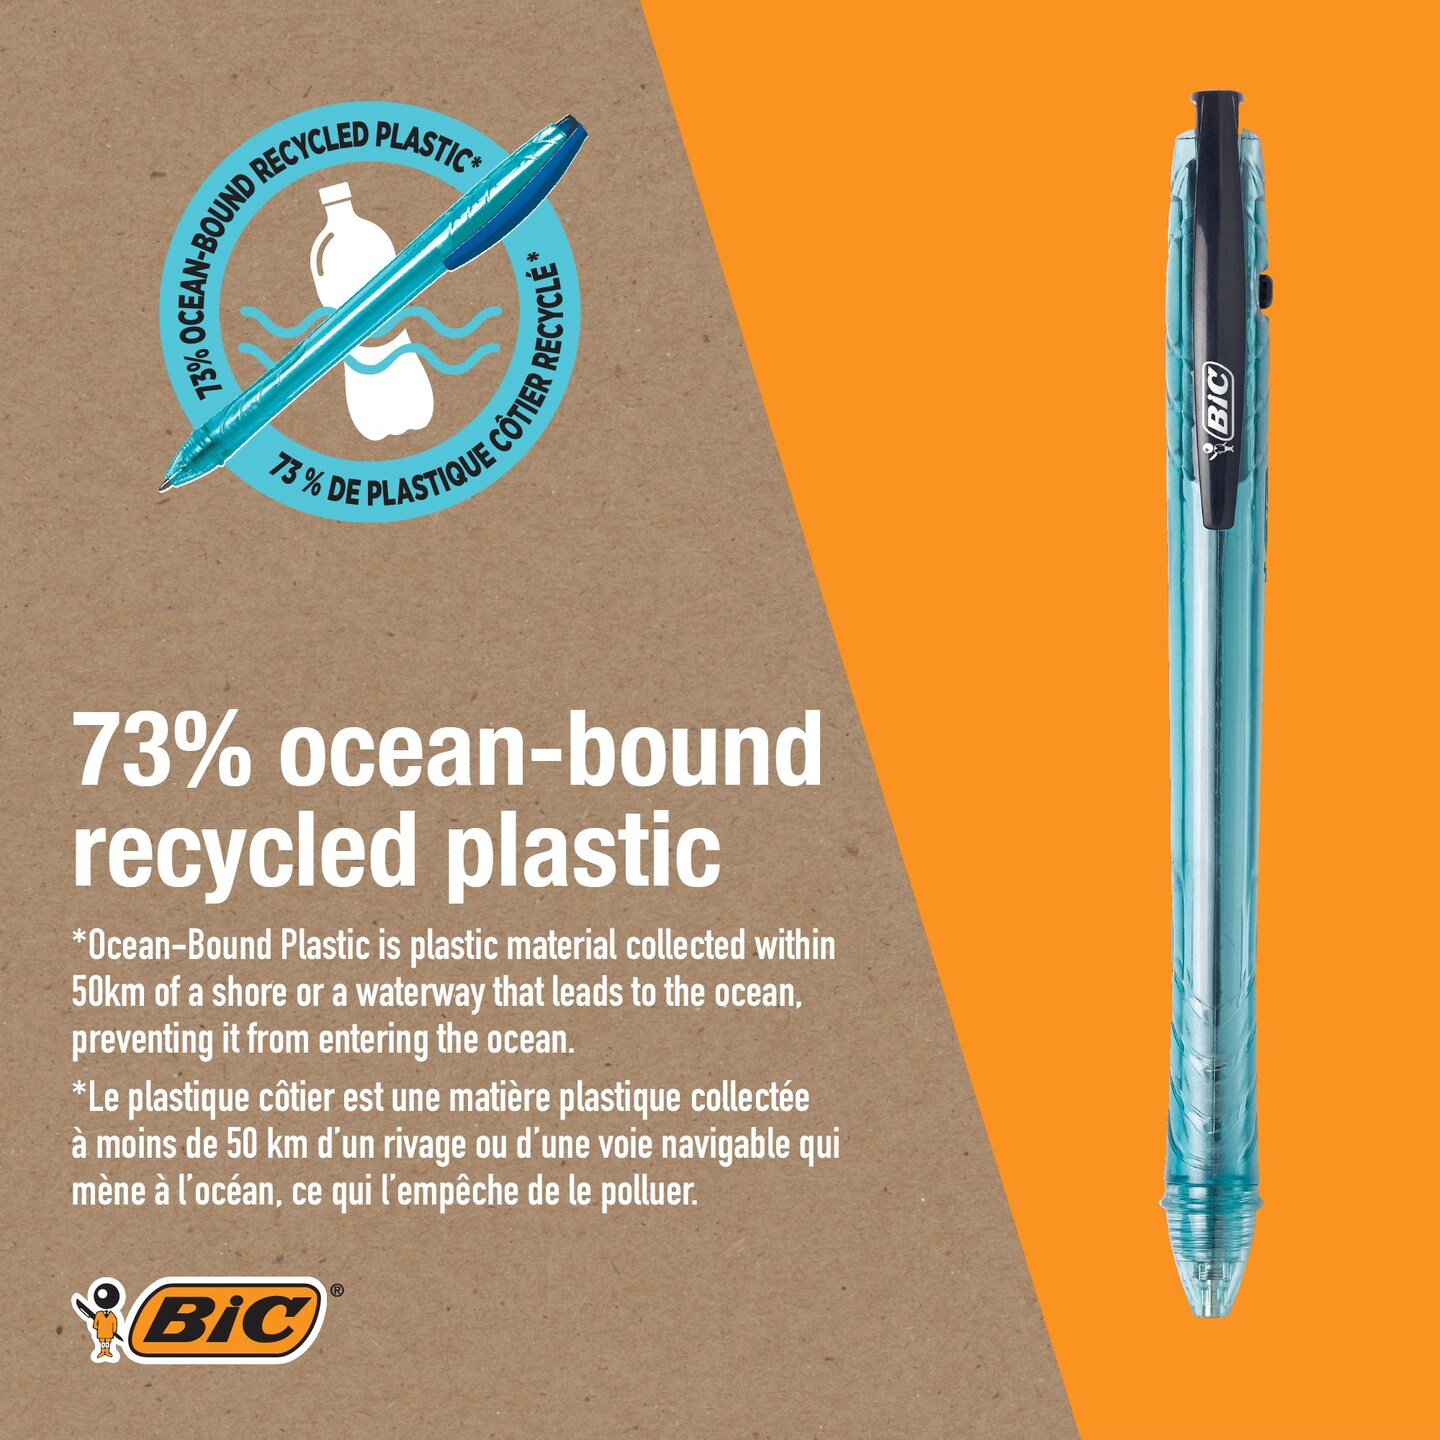 BIC ReVolution Ocean-Bound 73% Recycled Plastic Ball Pen, Medium Point (1.0 mm), 100% Recycled Packaging, Black, 12-Count